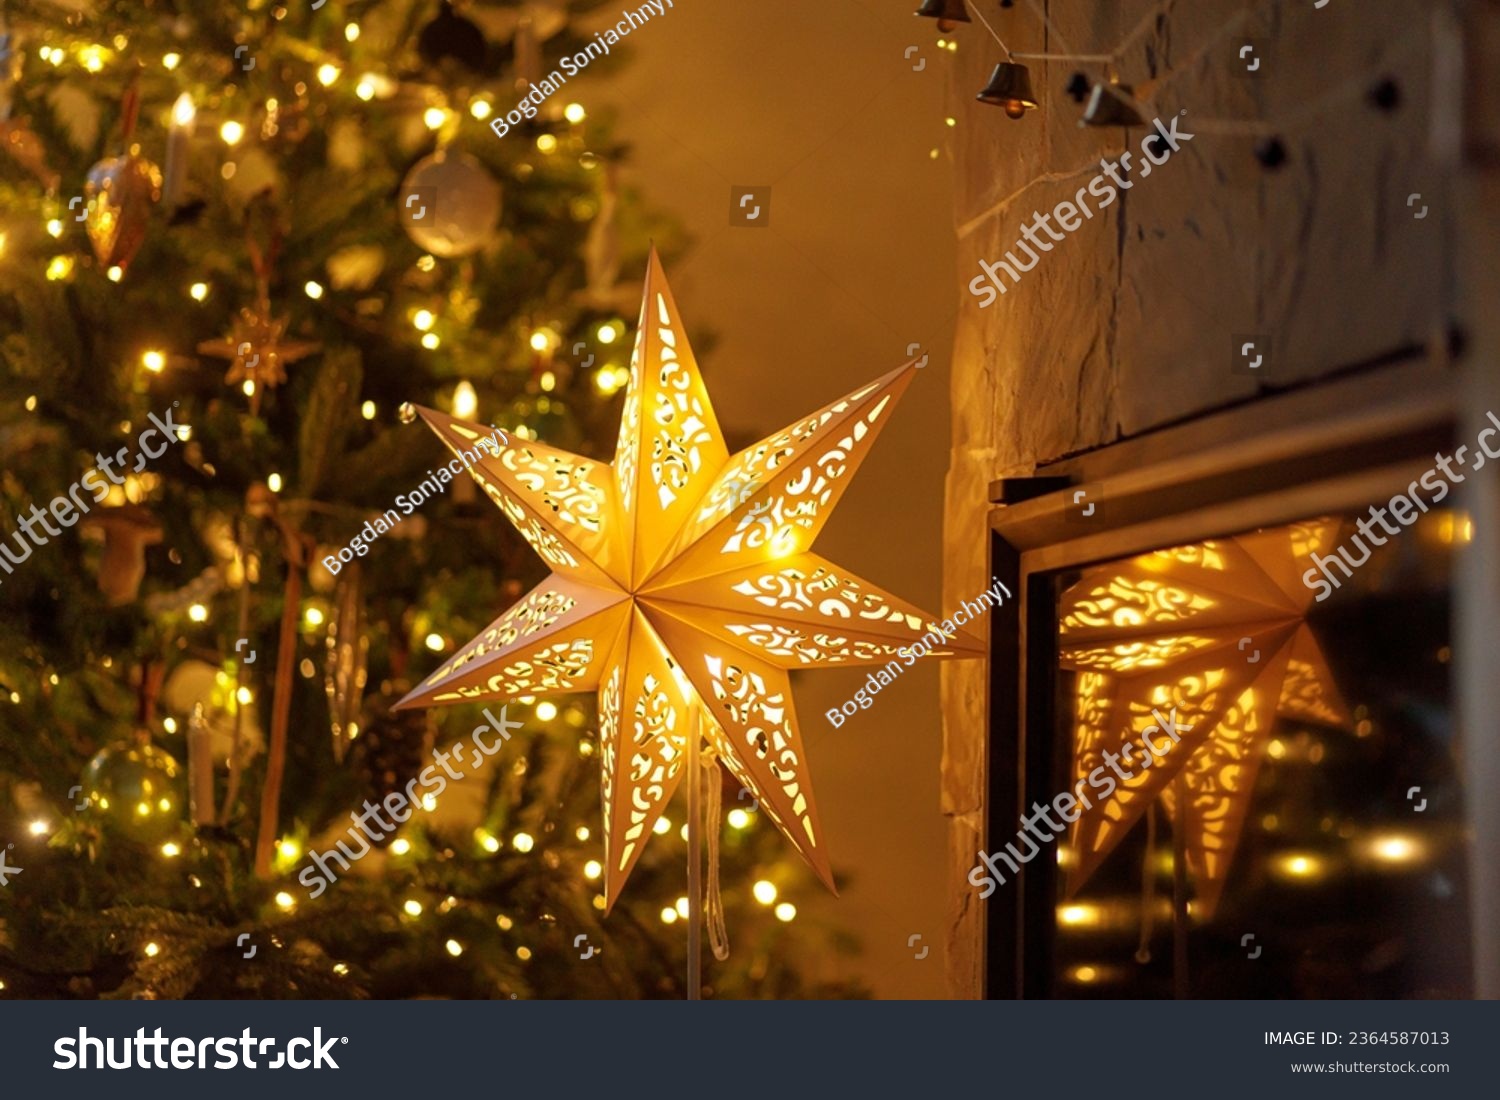 Atmospheric christmas eve. Stylish christmas illuminated star, decorated christmas tree with golden lights and festive decor on fireplace mantel in scandinavian room. Merry Christmas! #2364587013